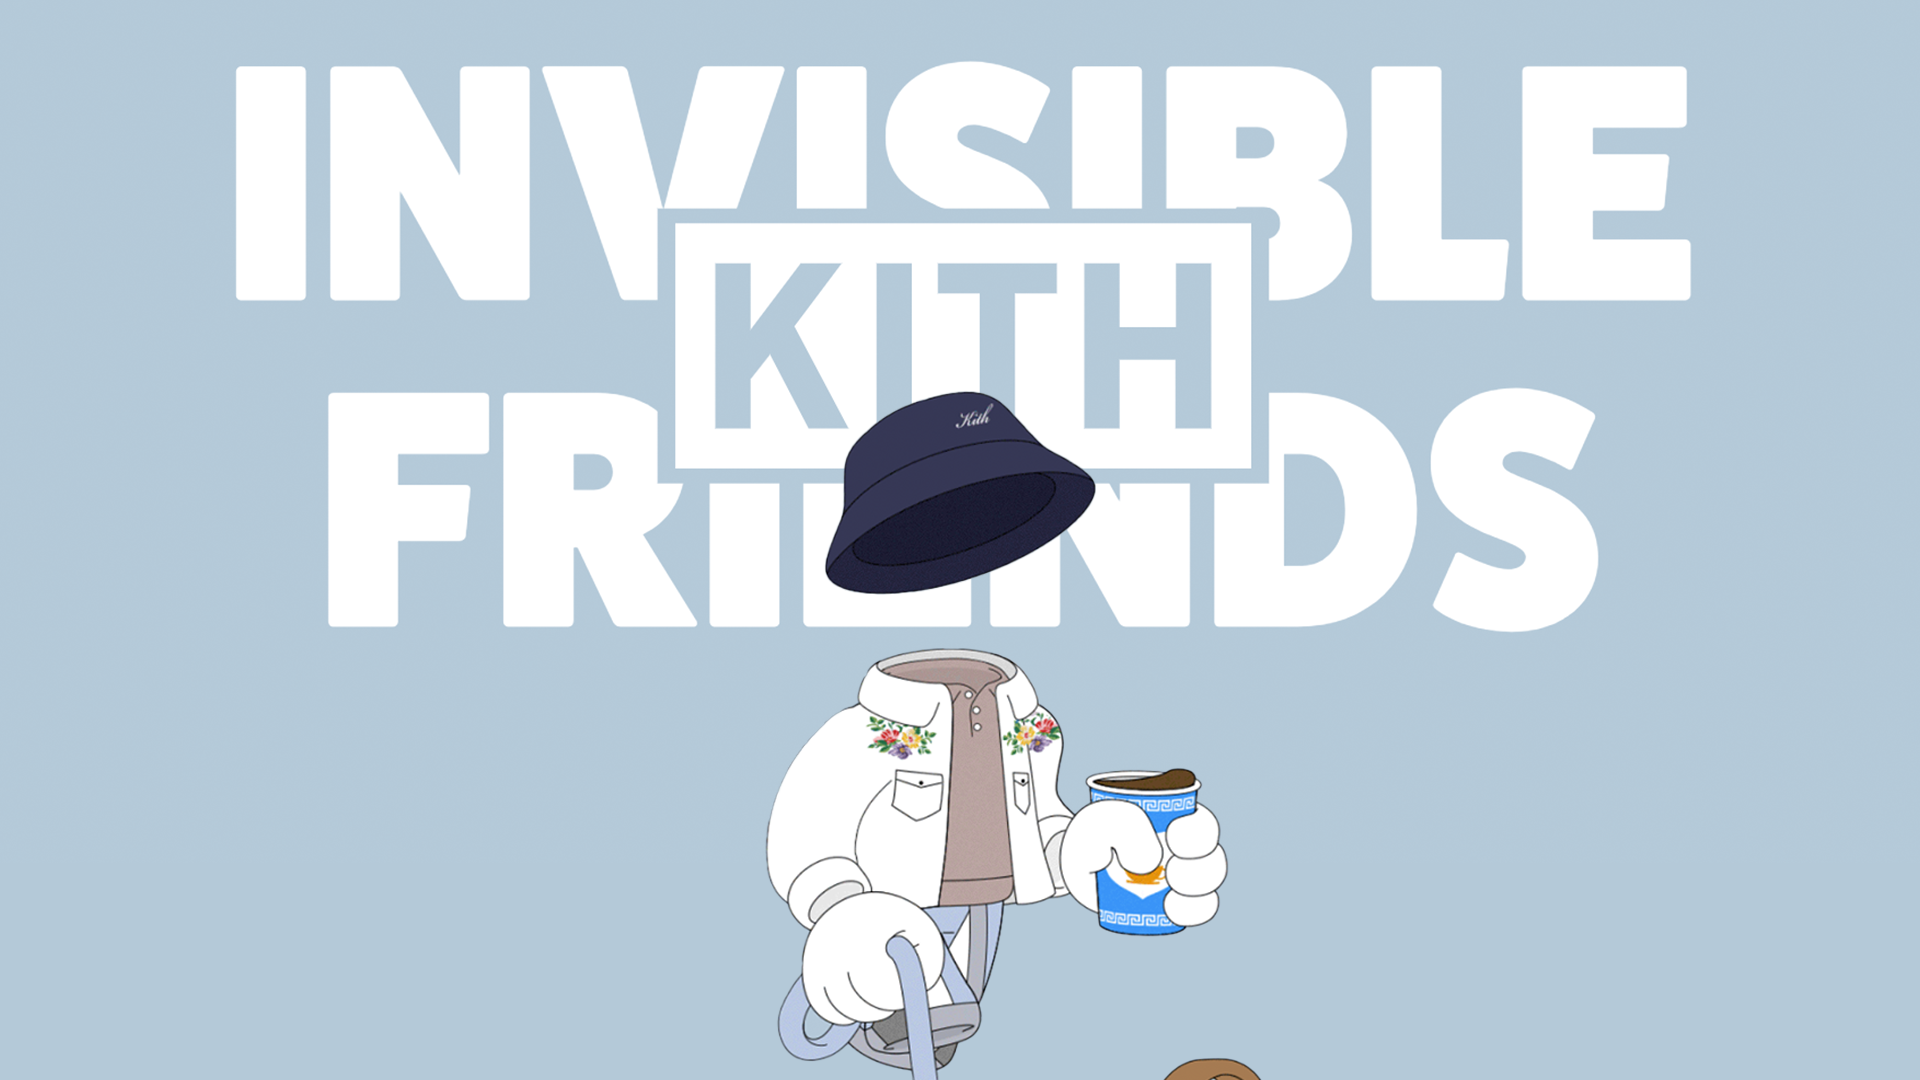 Invisible Friends  NFT  WorldCoinIndex